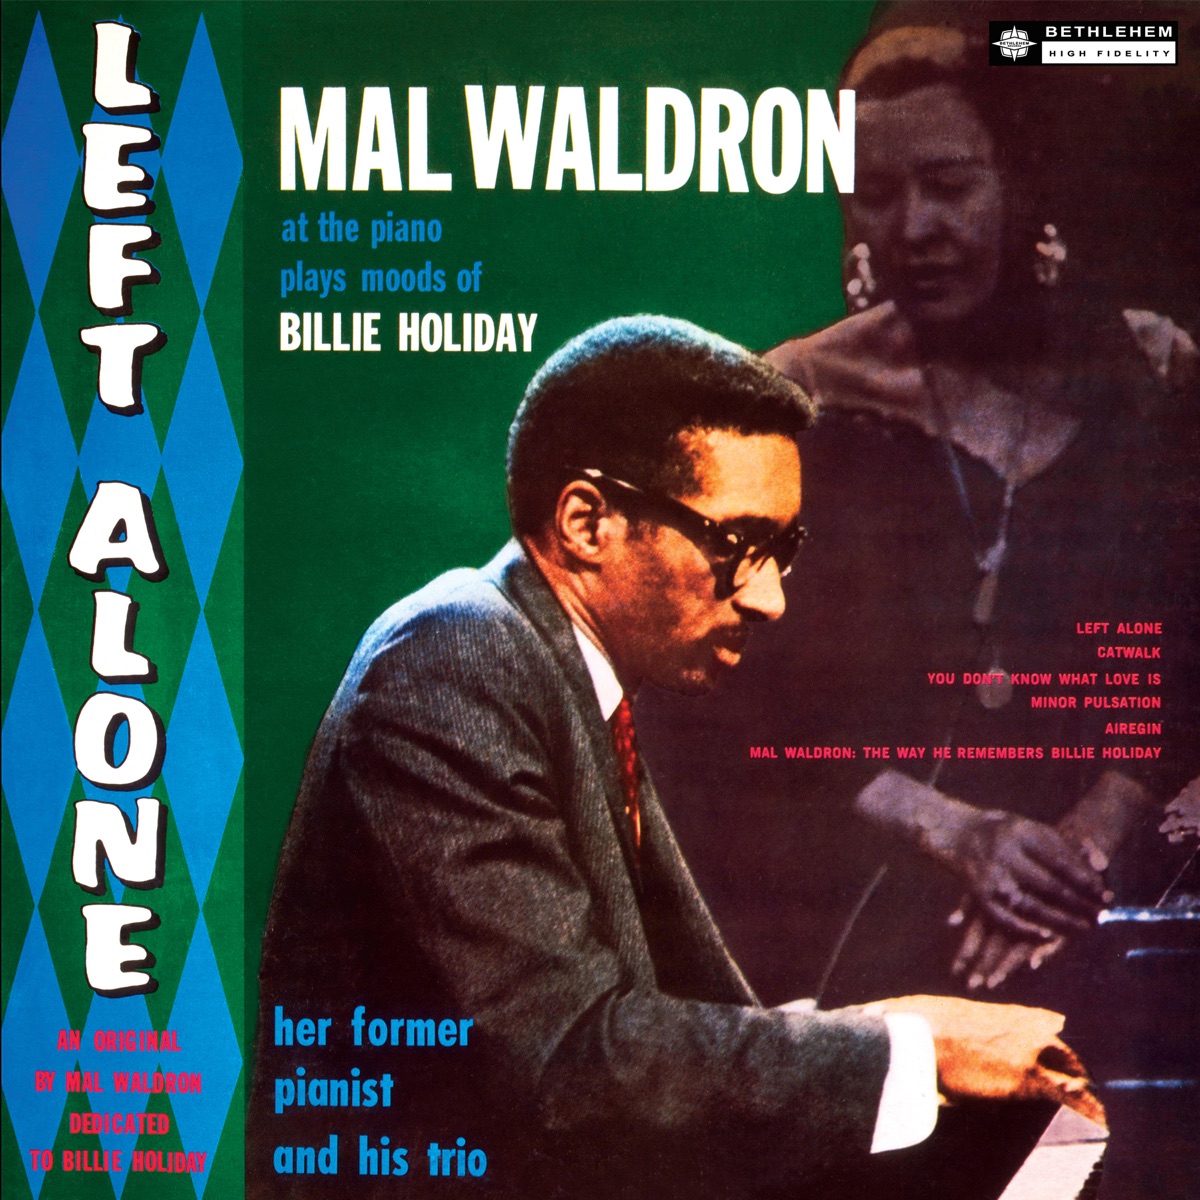 MAL WALDRON A TOUCH OF THE BLUESマルウォルドロン - レコード